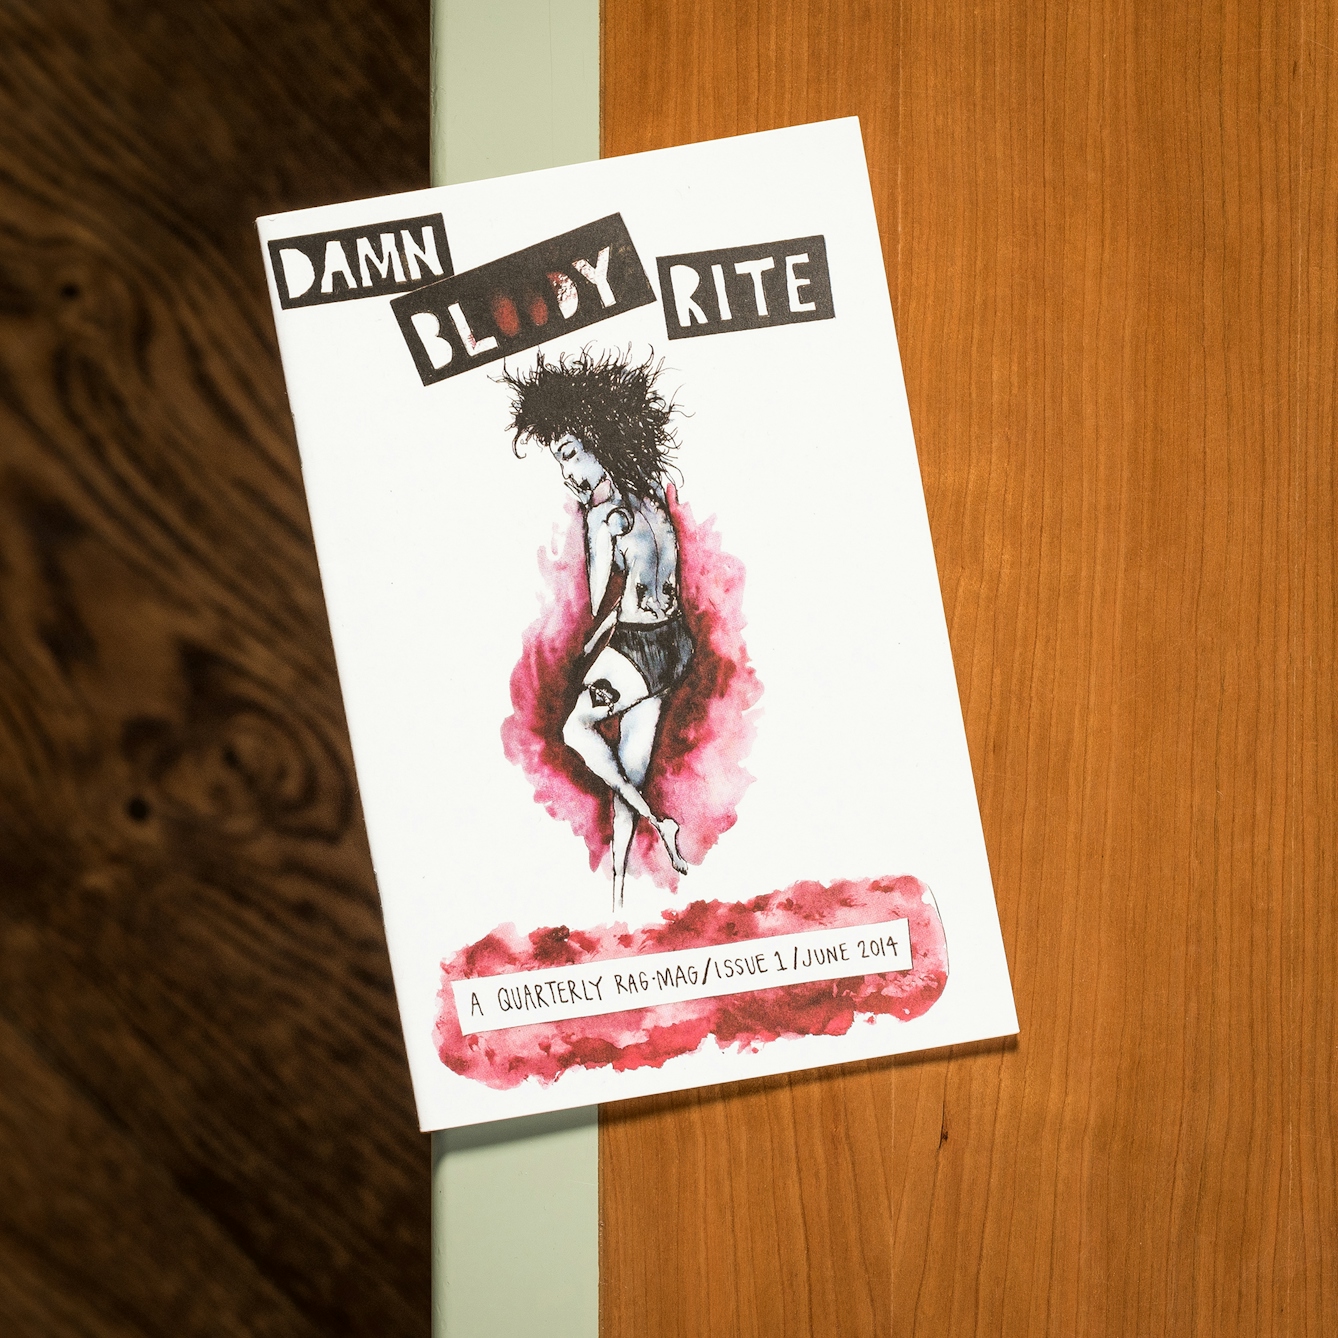 Photograph of Damn Bloody Rite zine on a library desk